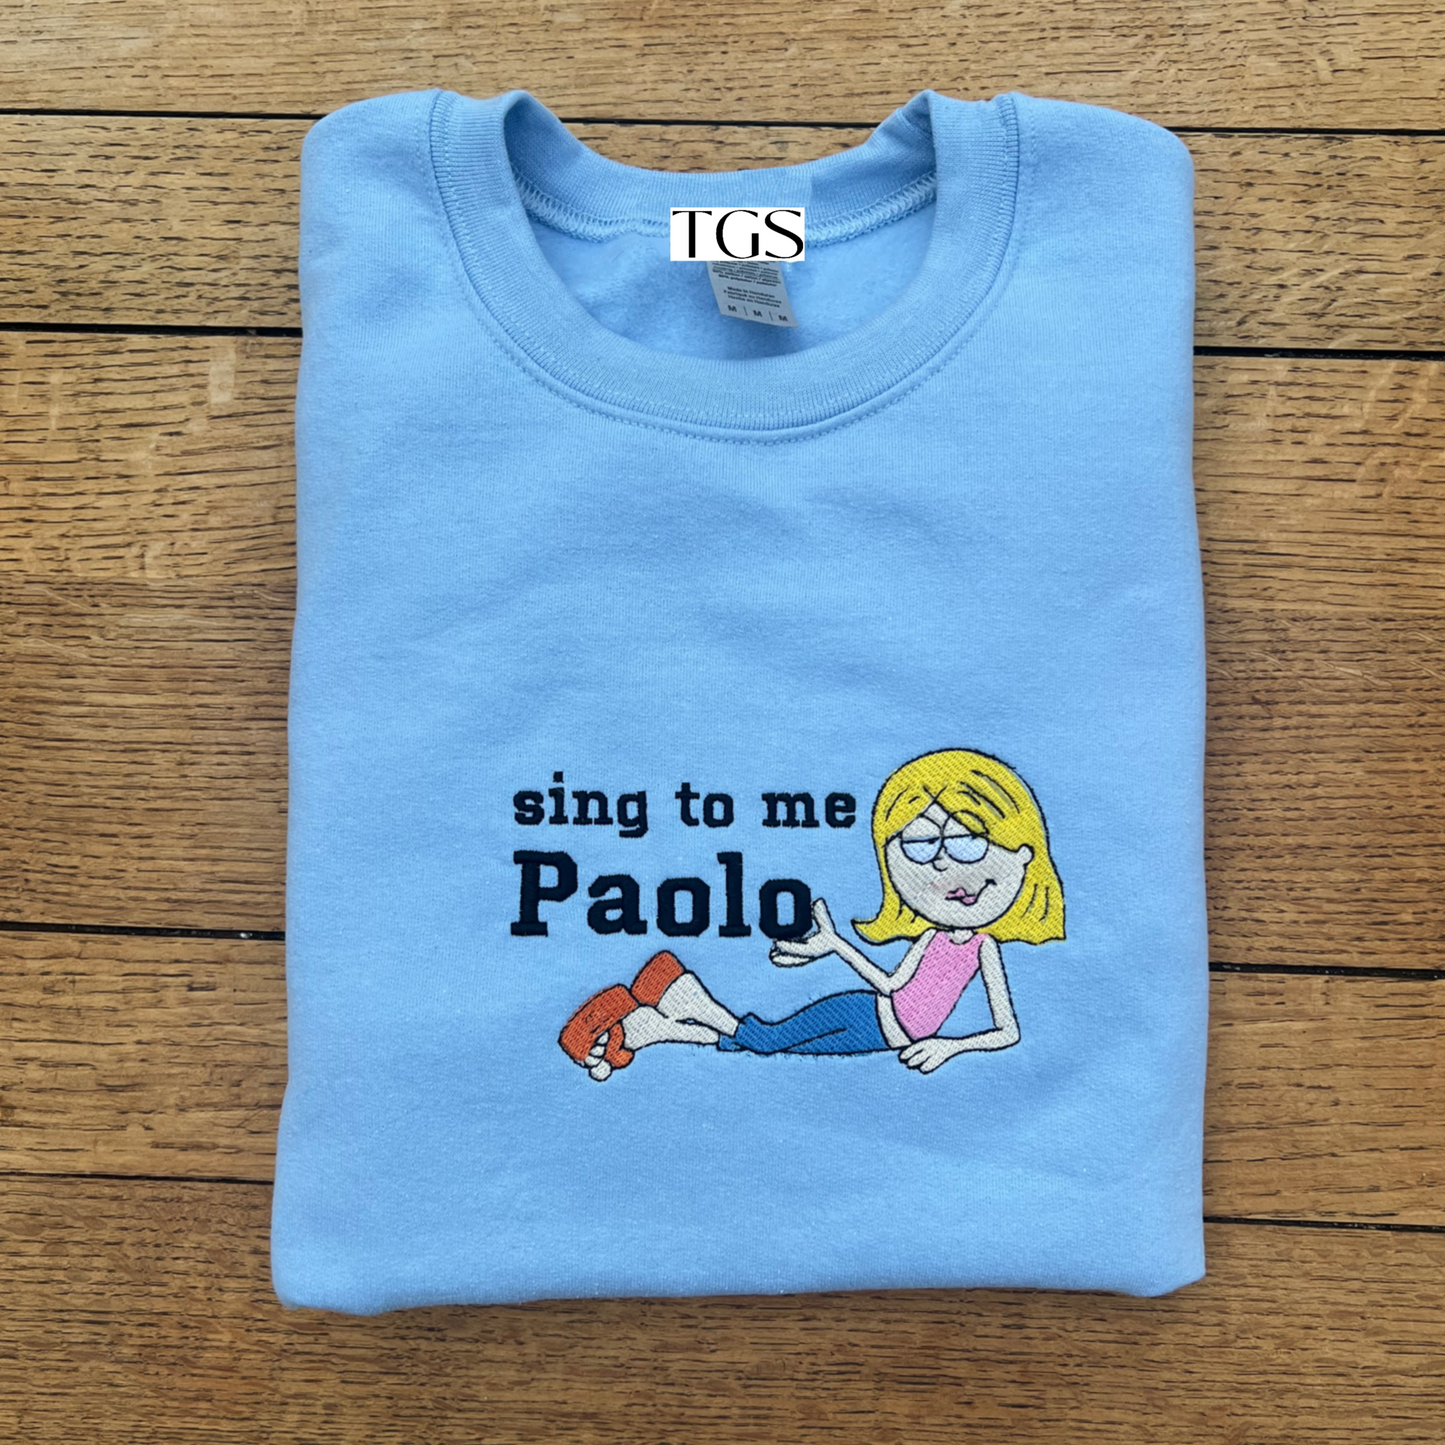 Sing to me Paolo Jumper